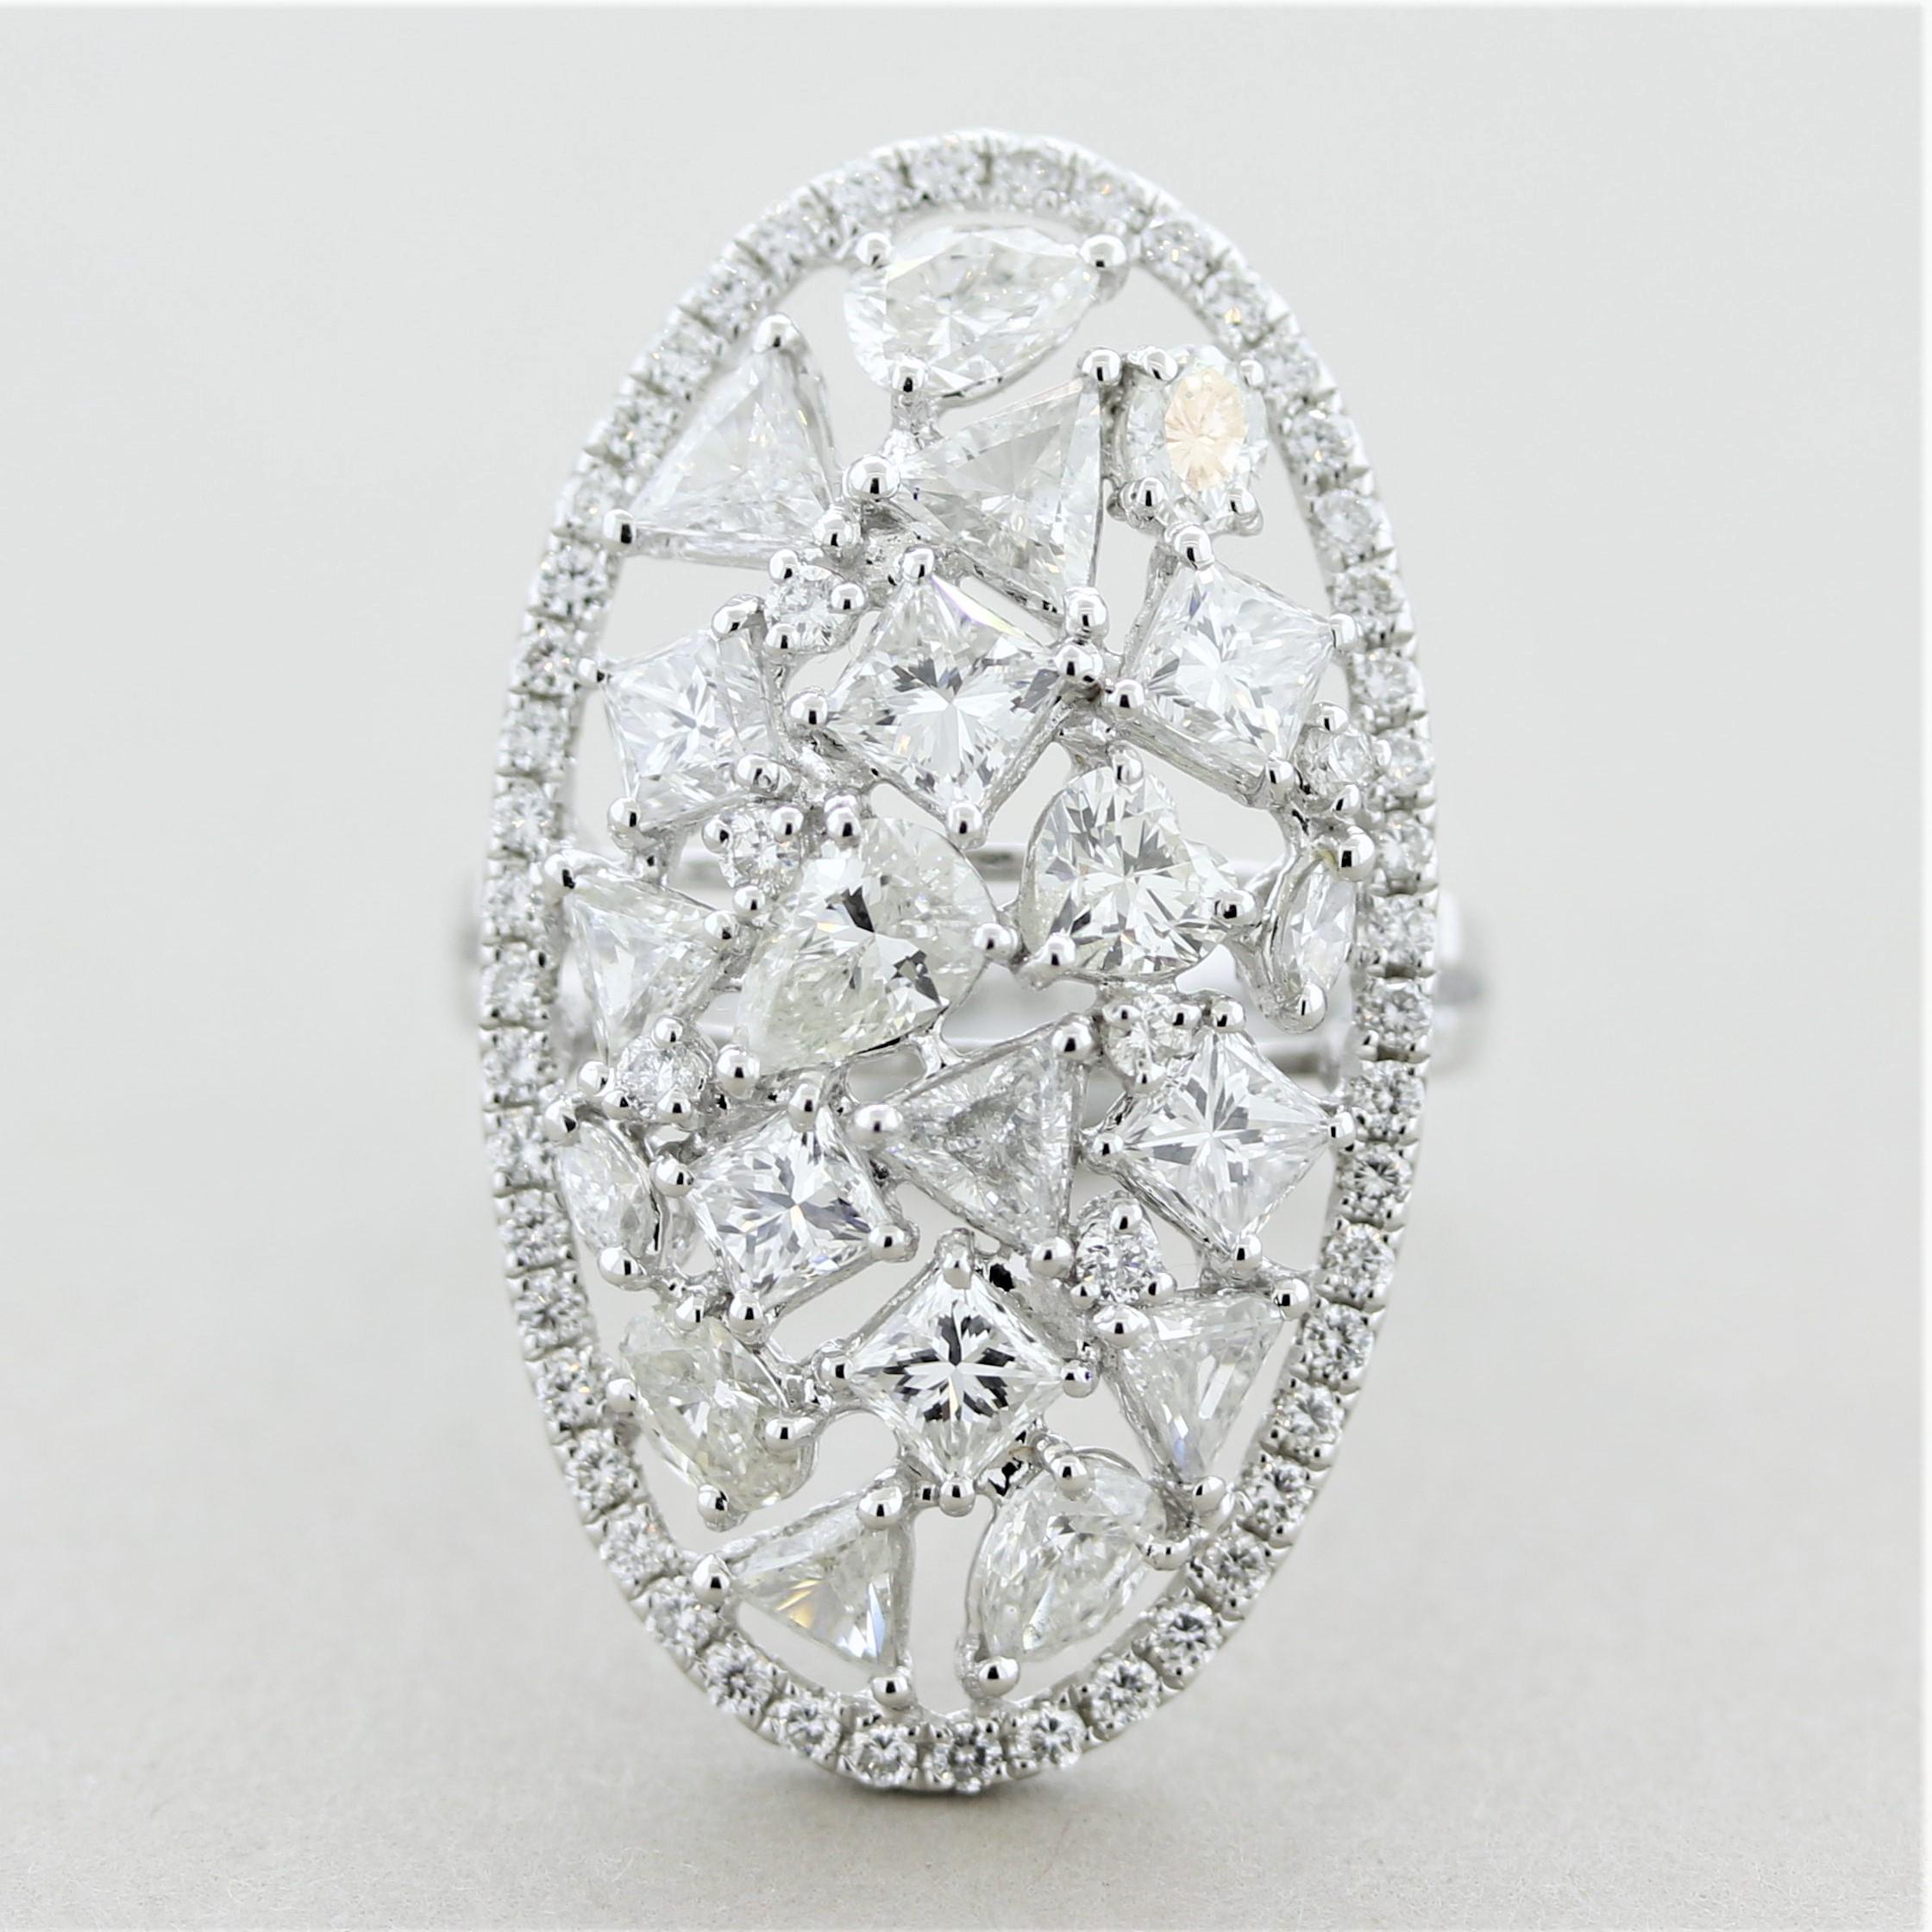 A unique diamond cluster ring featuring large diamonds in almost every shape! They include pear-shape, princess, marquise, oval, triangular and round brilliant-cuts. They are set close to each other creating a big bright cluster. In total the